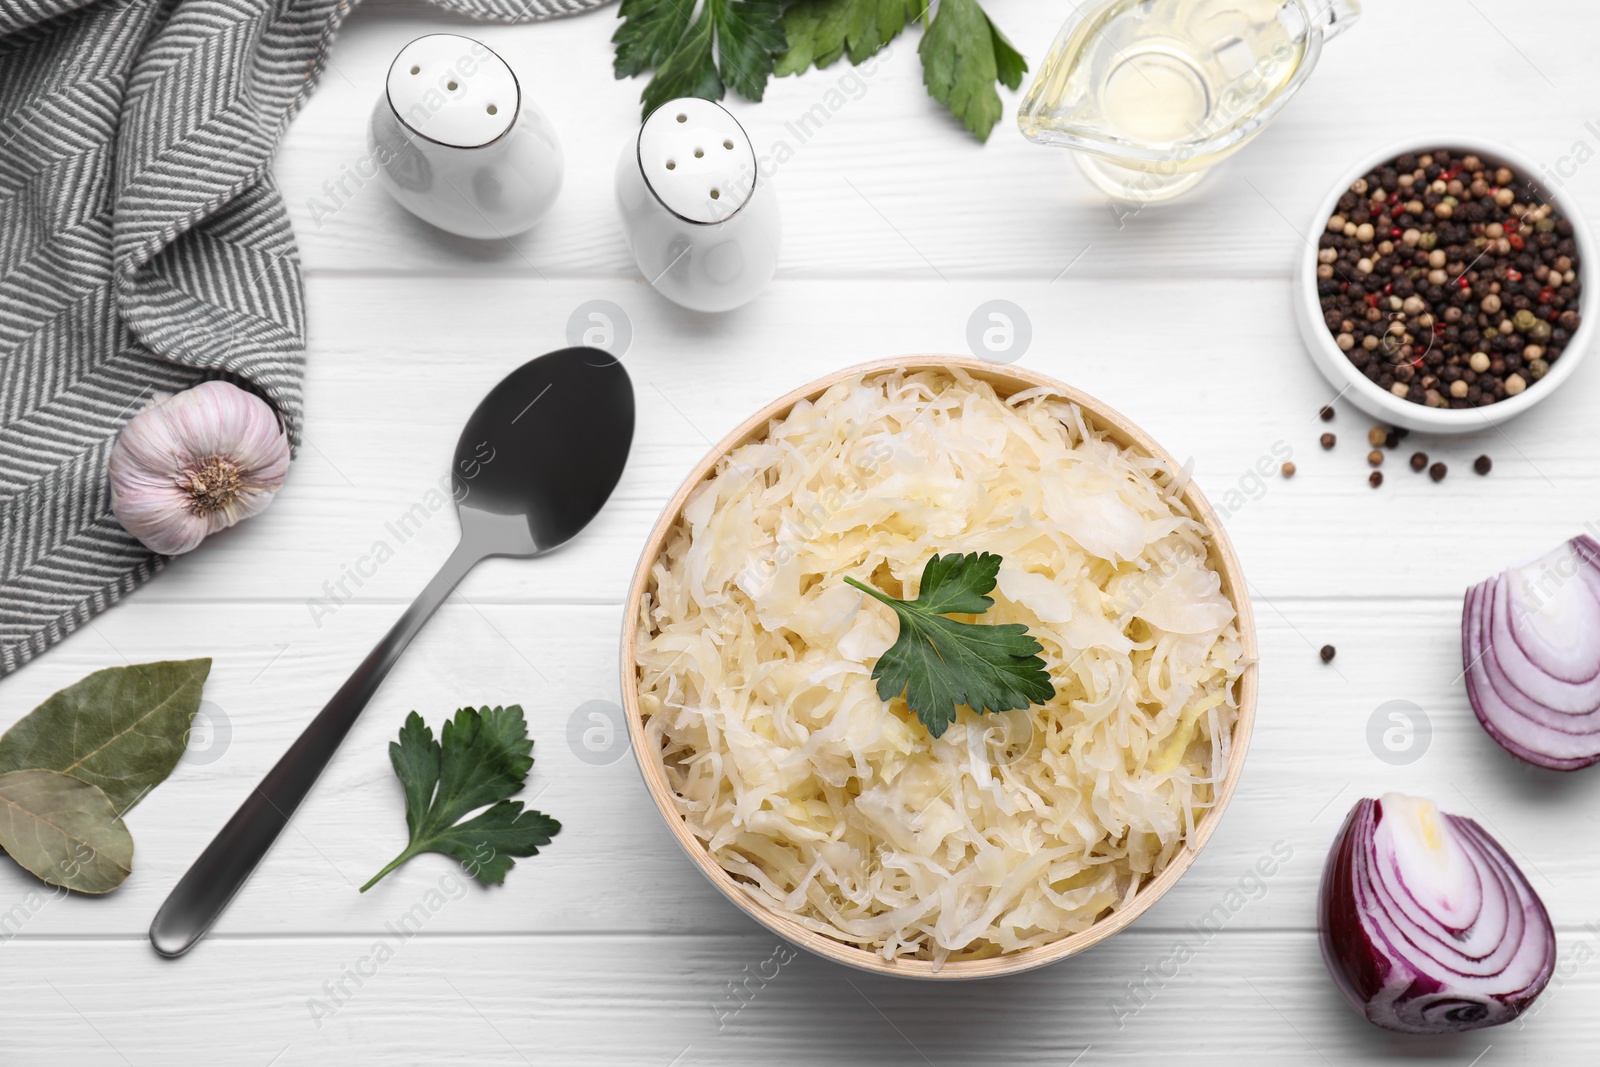 Photo of Bowl of tasty sauerkraut and ingredients on white wooden table, flat lay